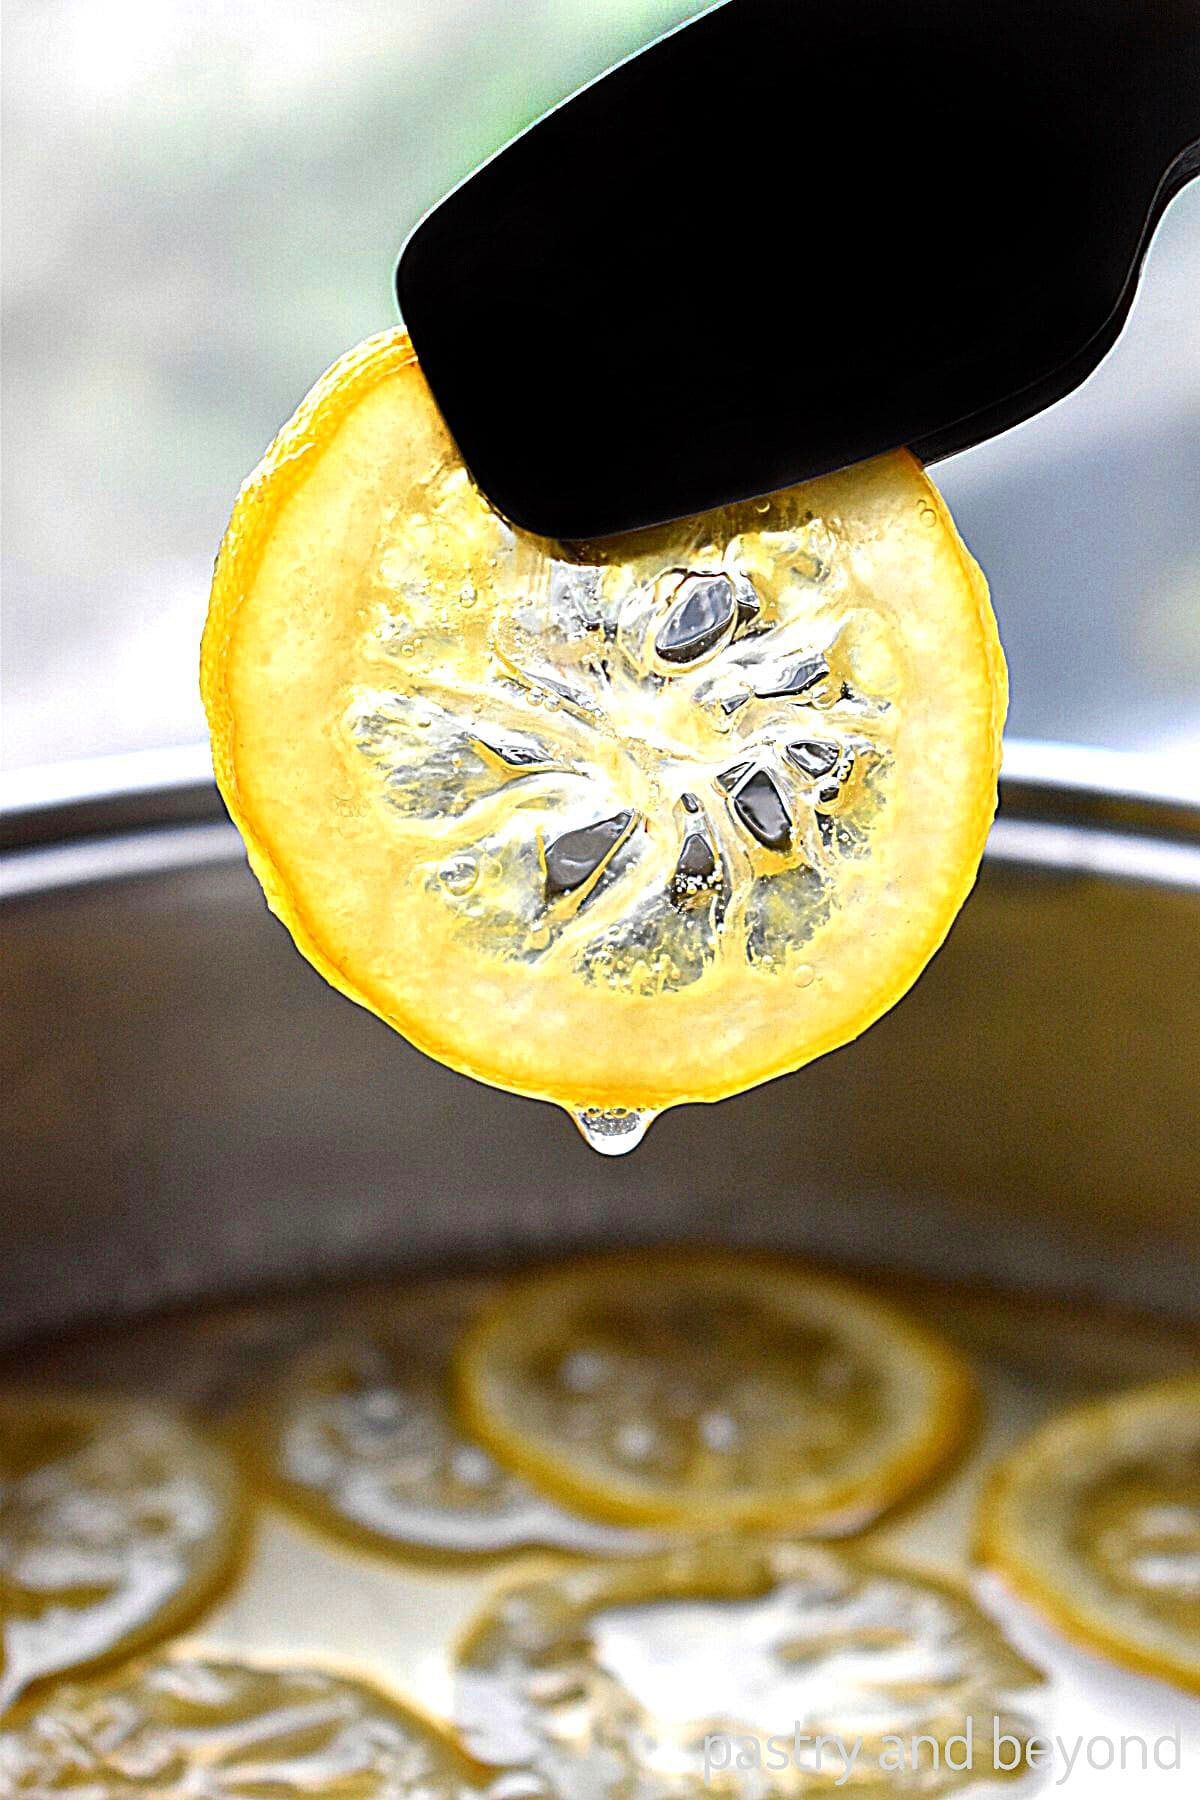 Holding candied lemon slice with tongs.